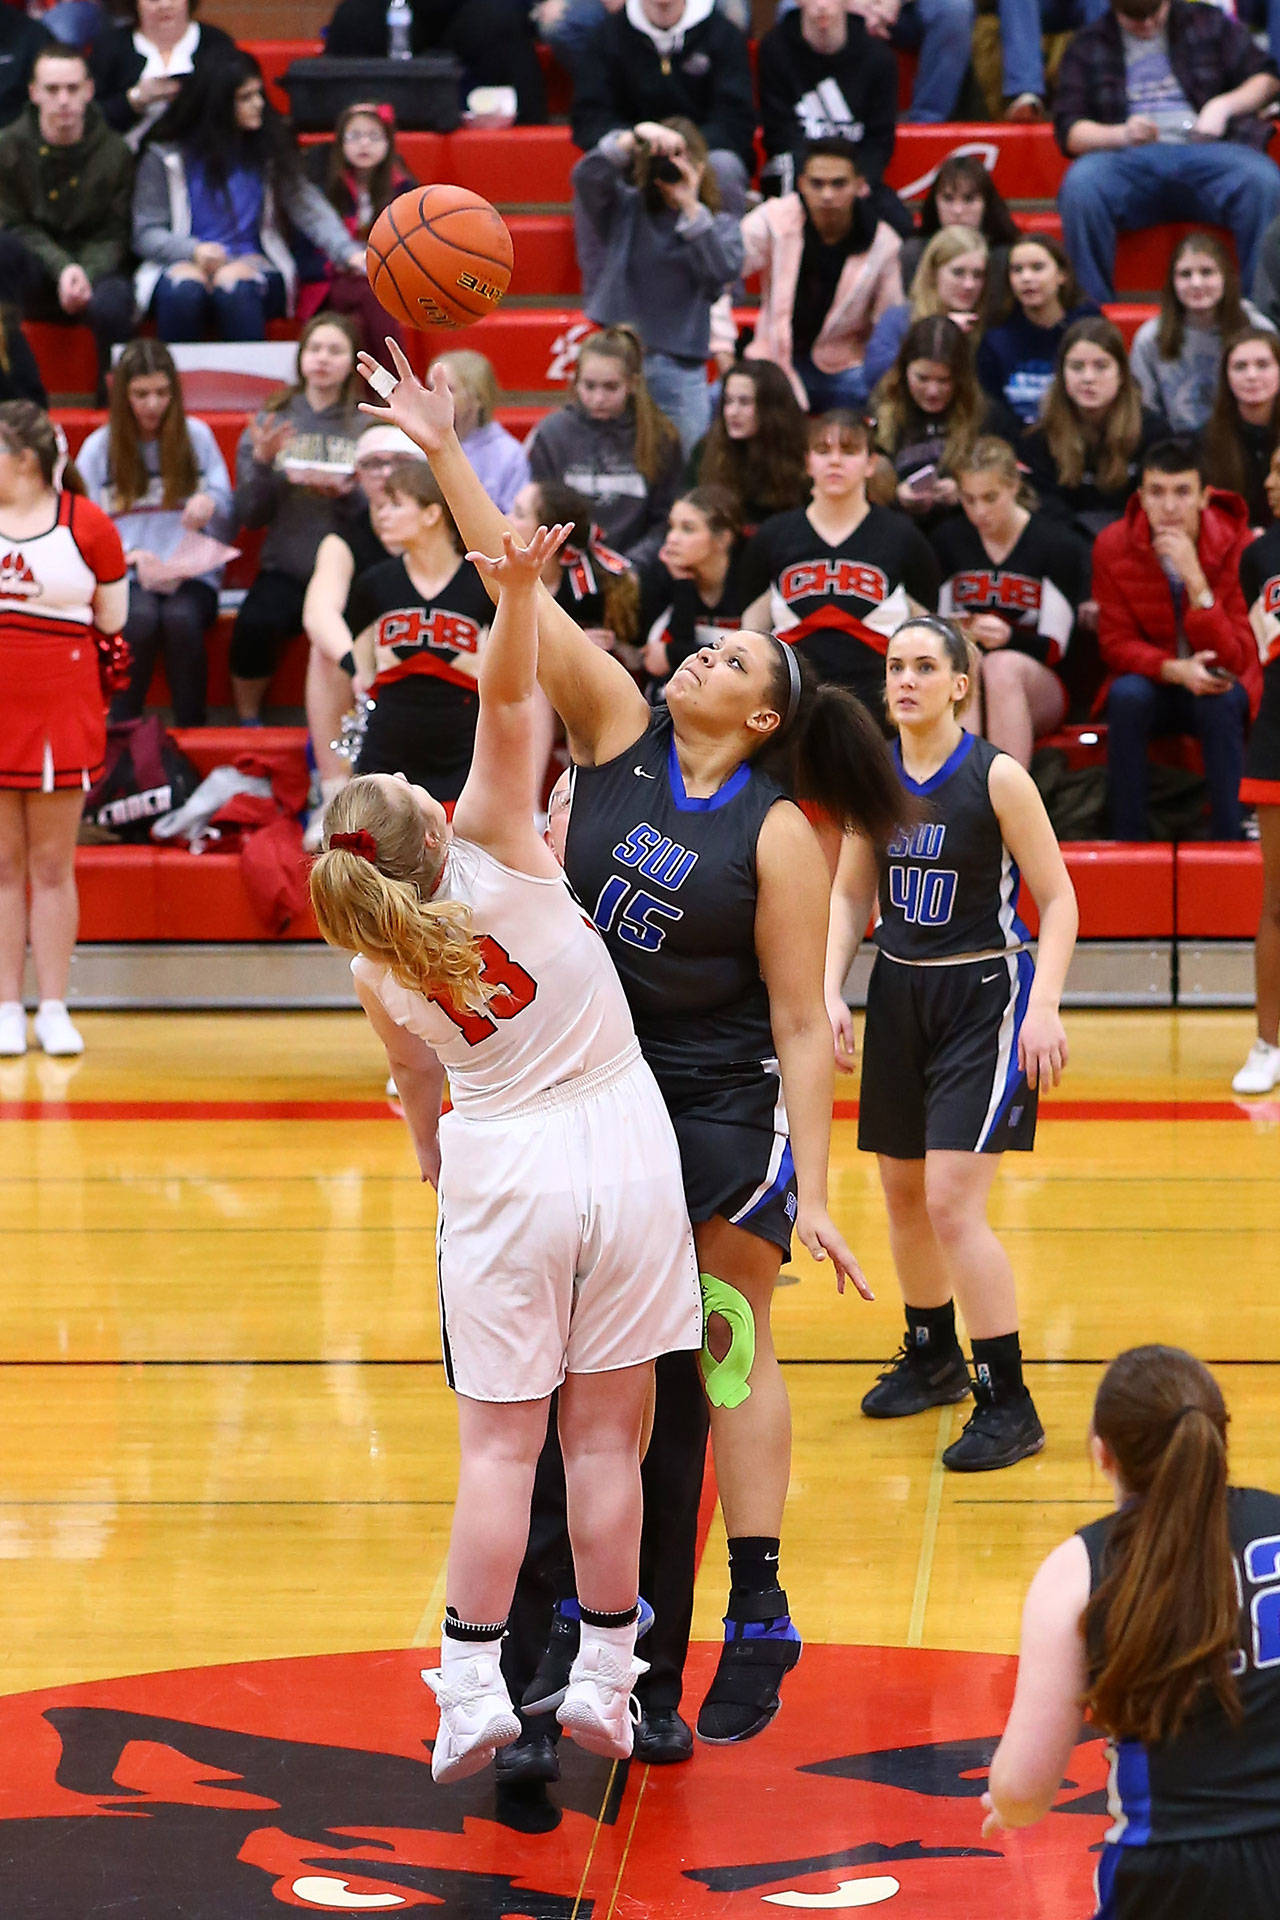 South Whidbey’s Arianna Briggs, right, out jumps Coupeville’s Hannah Davidson on the opening tip.(Photo by John Fisken)